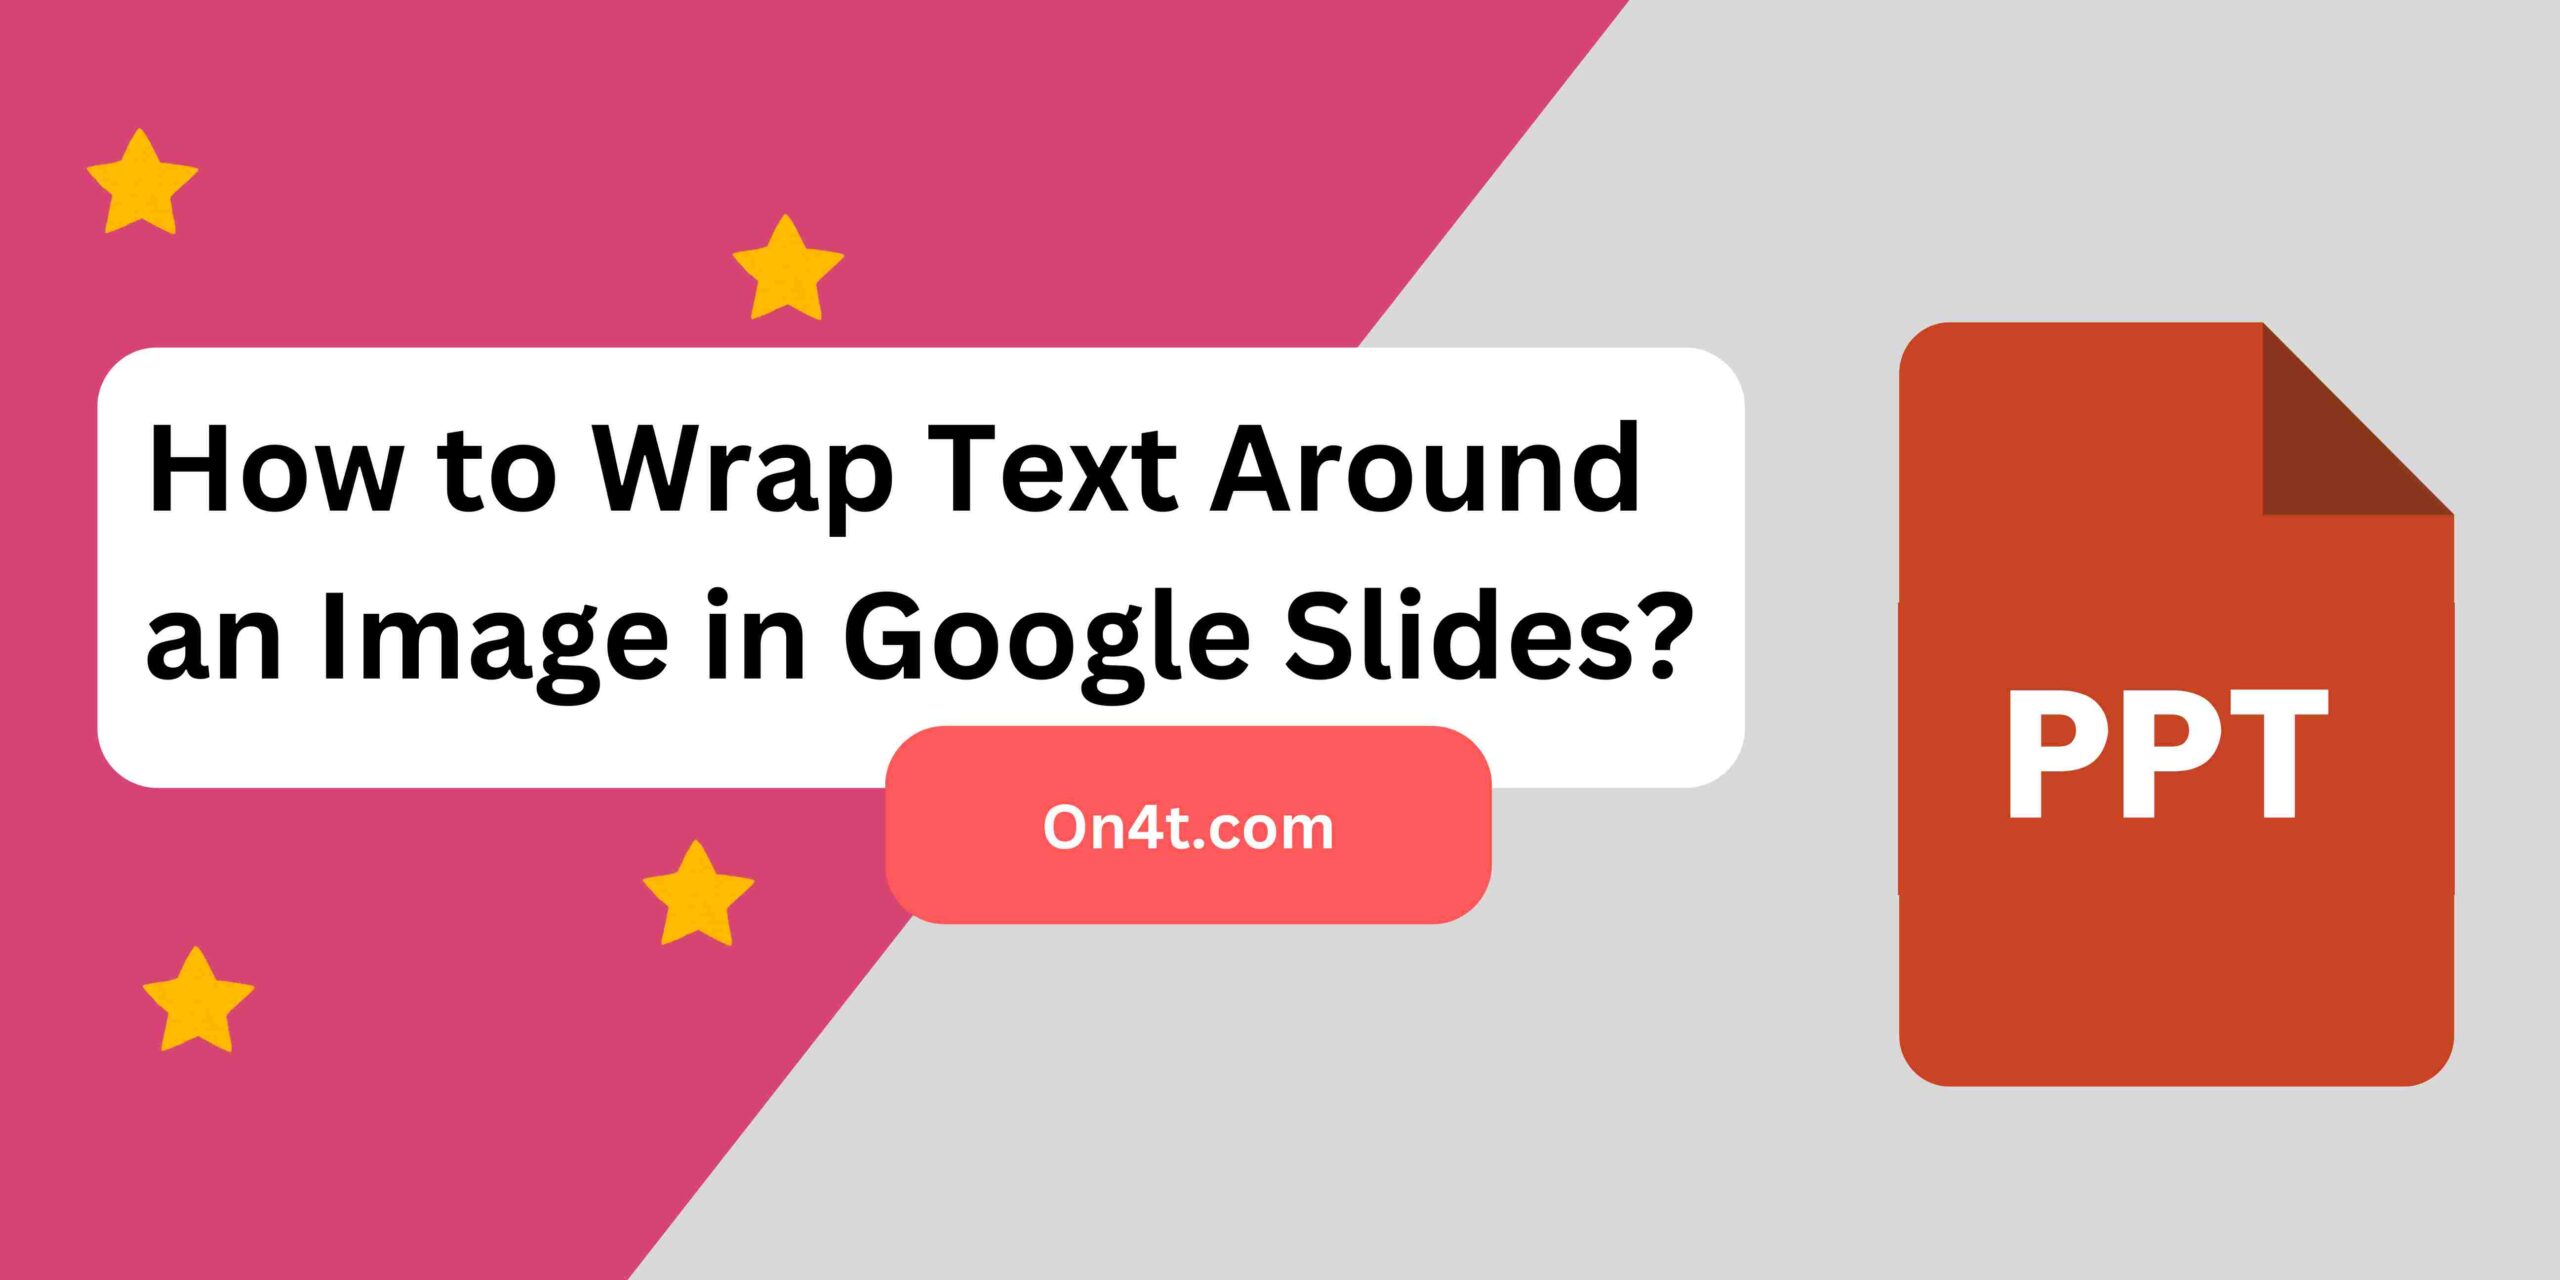 How to Wrap Text Around an Image in Google Slides